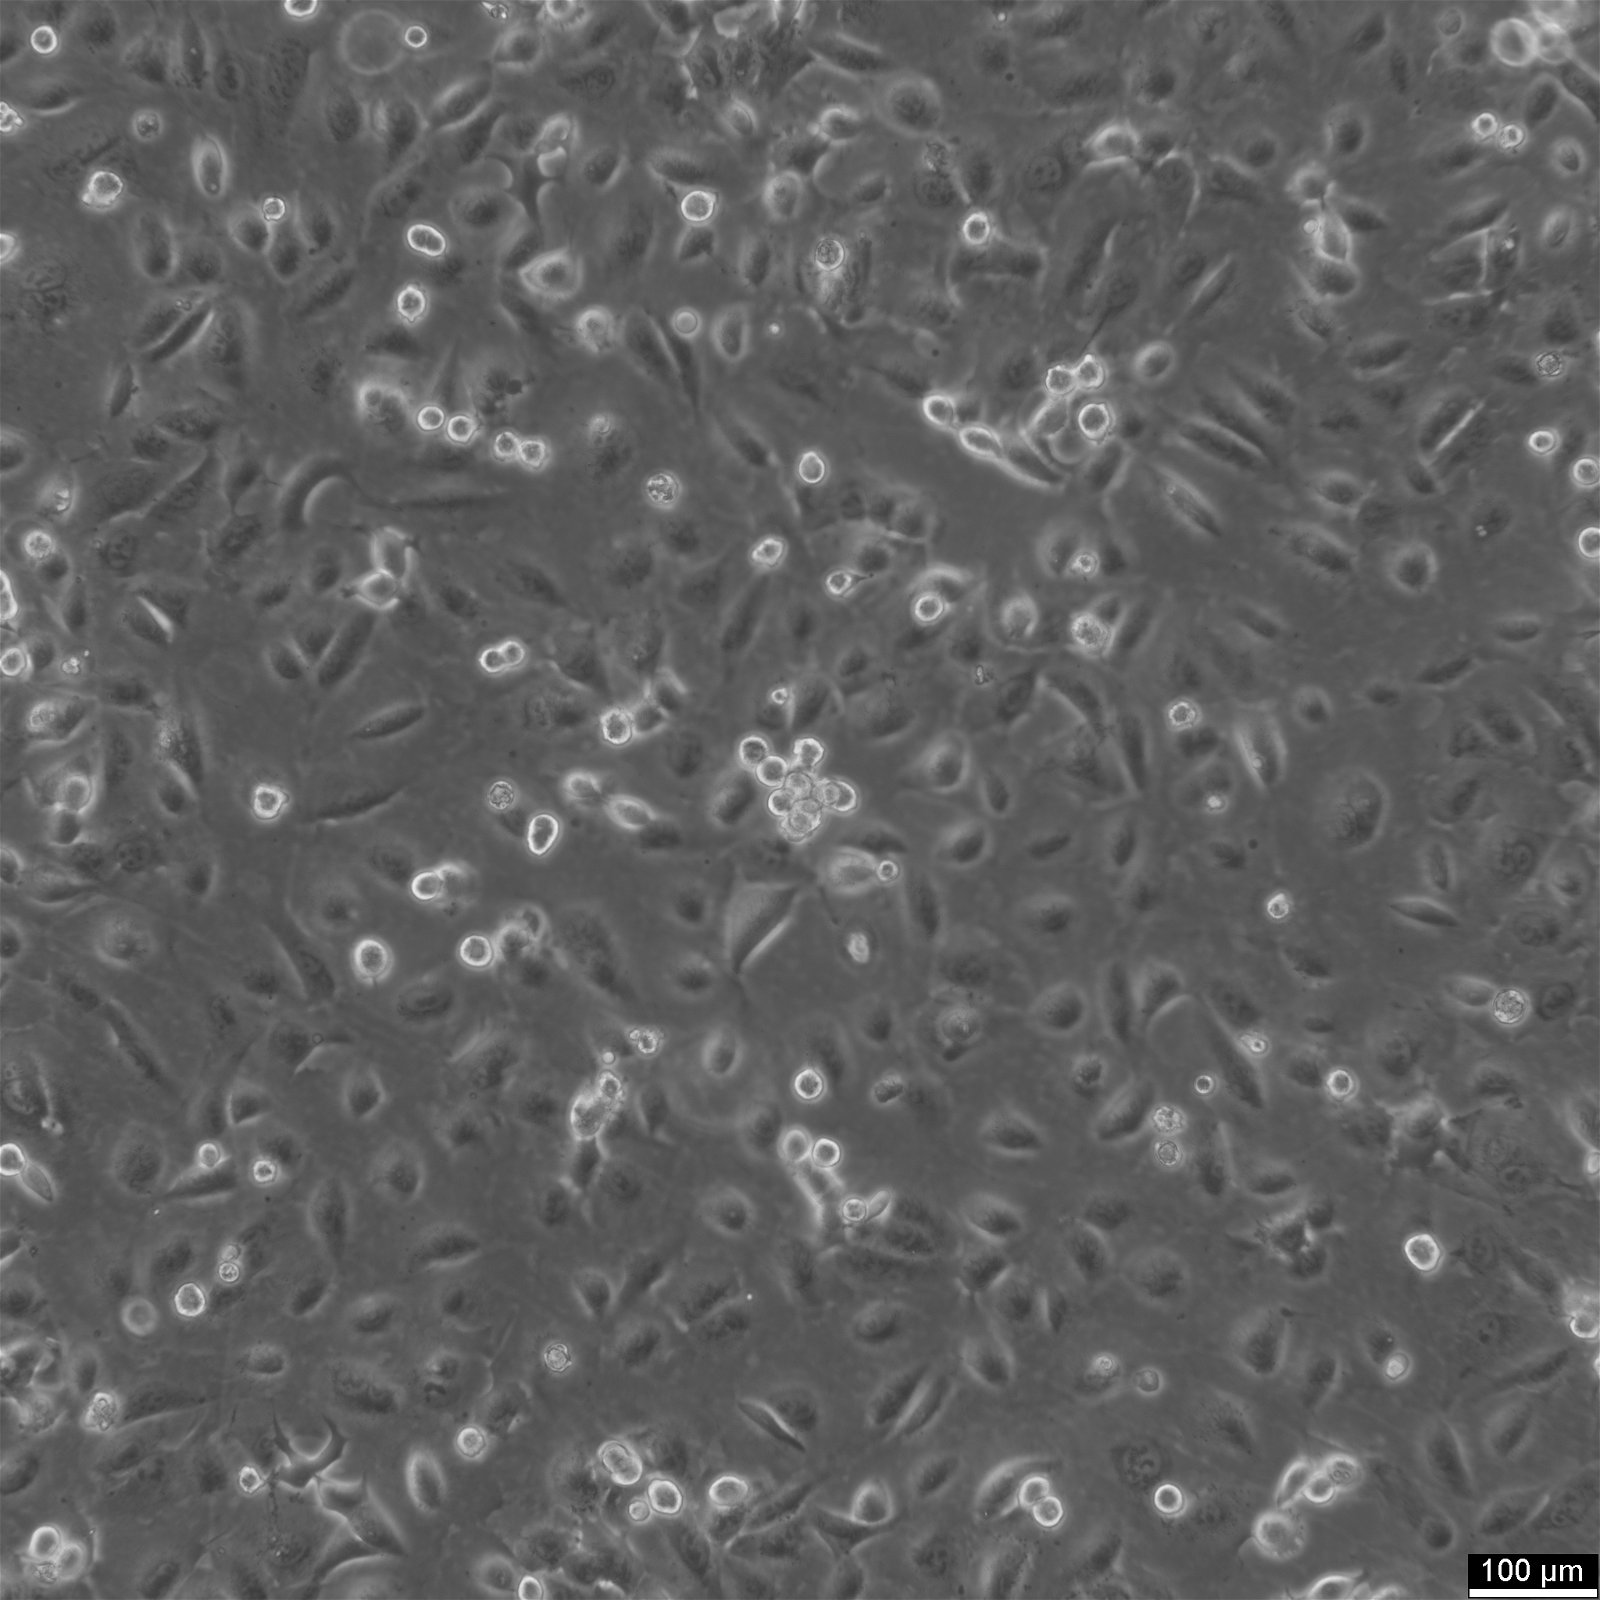 LCLC-103H Cells